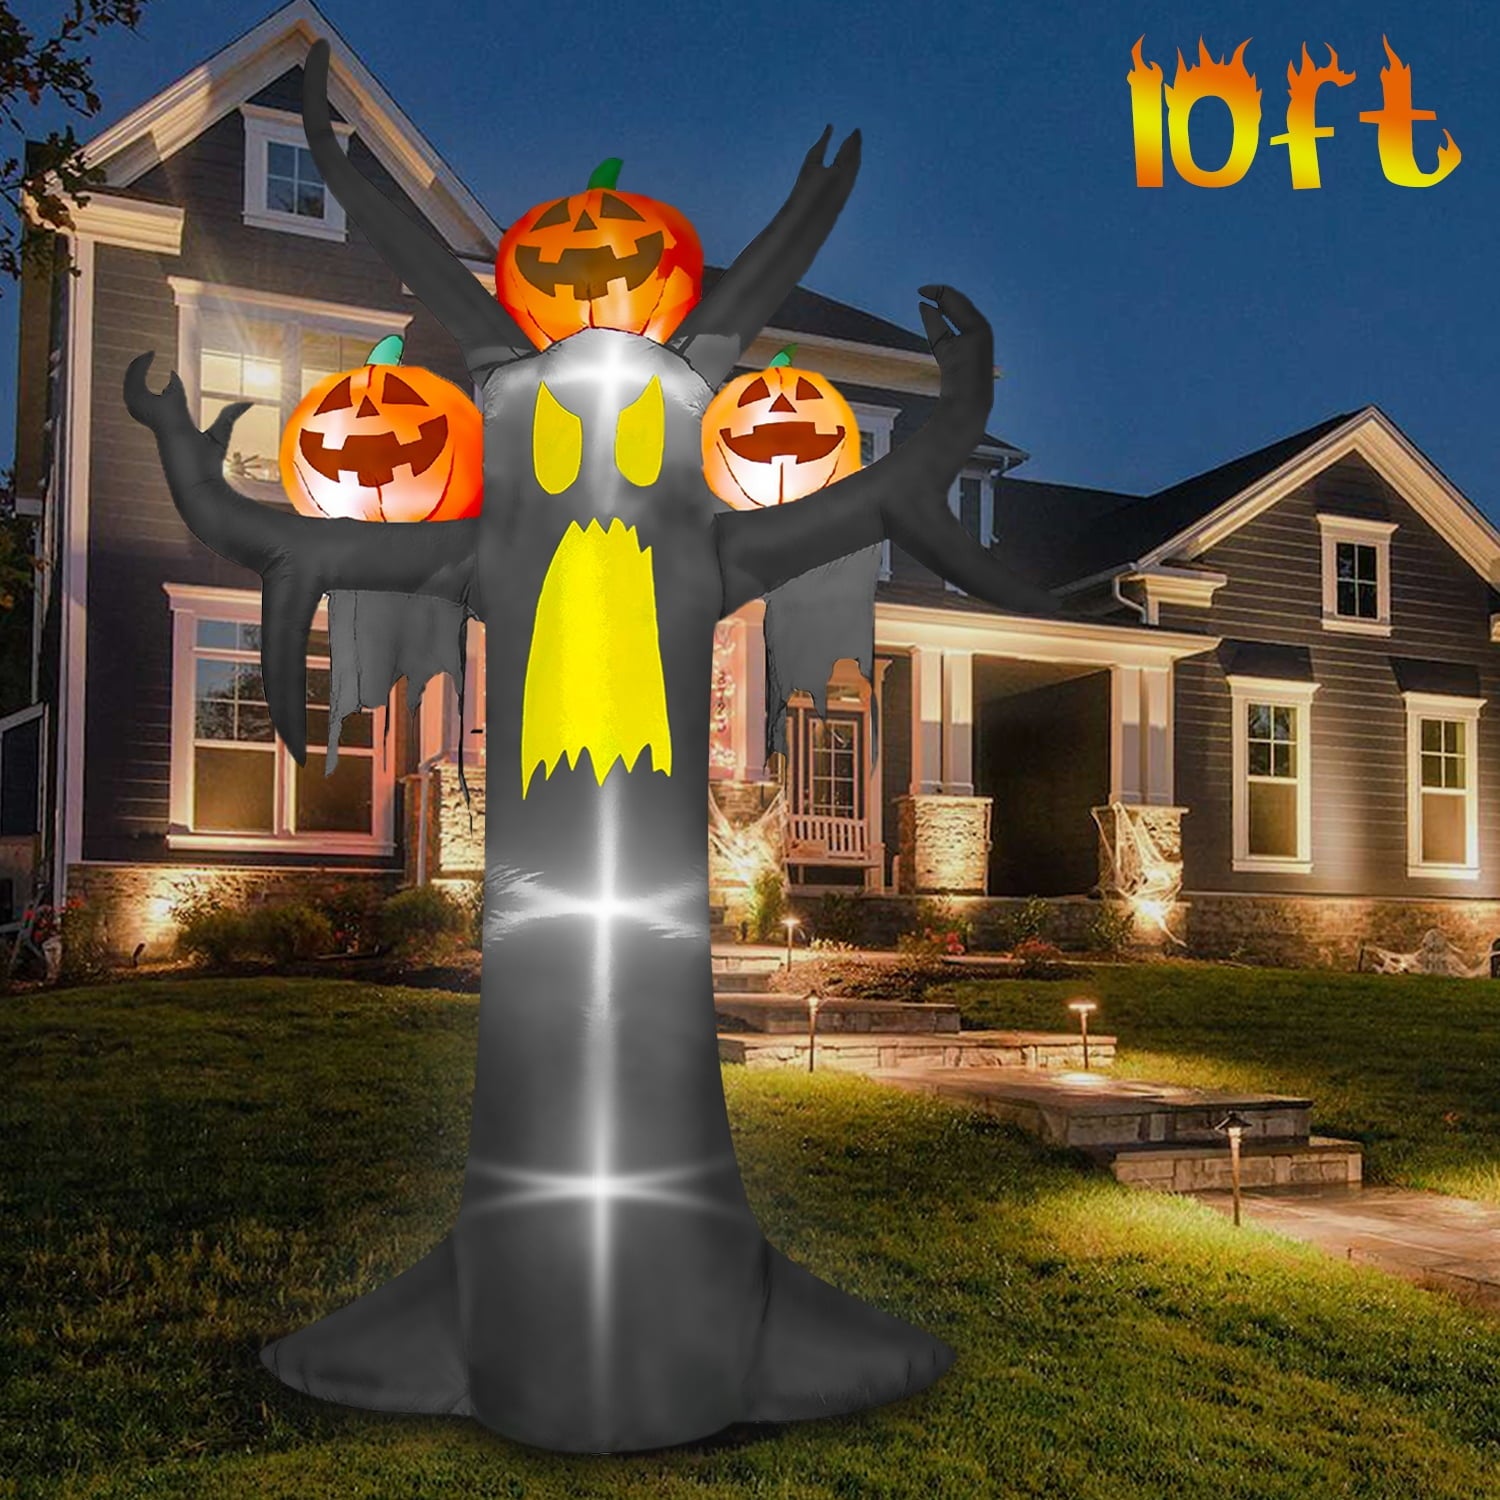 10ft Halloween Inflatables Ghost Tree with Pumpkins, Melliful Halloween Blow-up Yard Decorations Built-in LED Lights